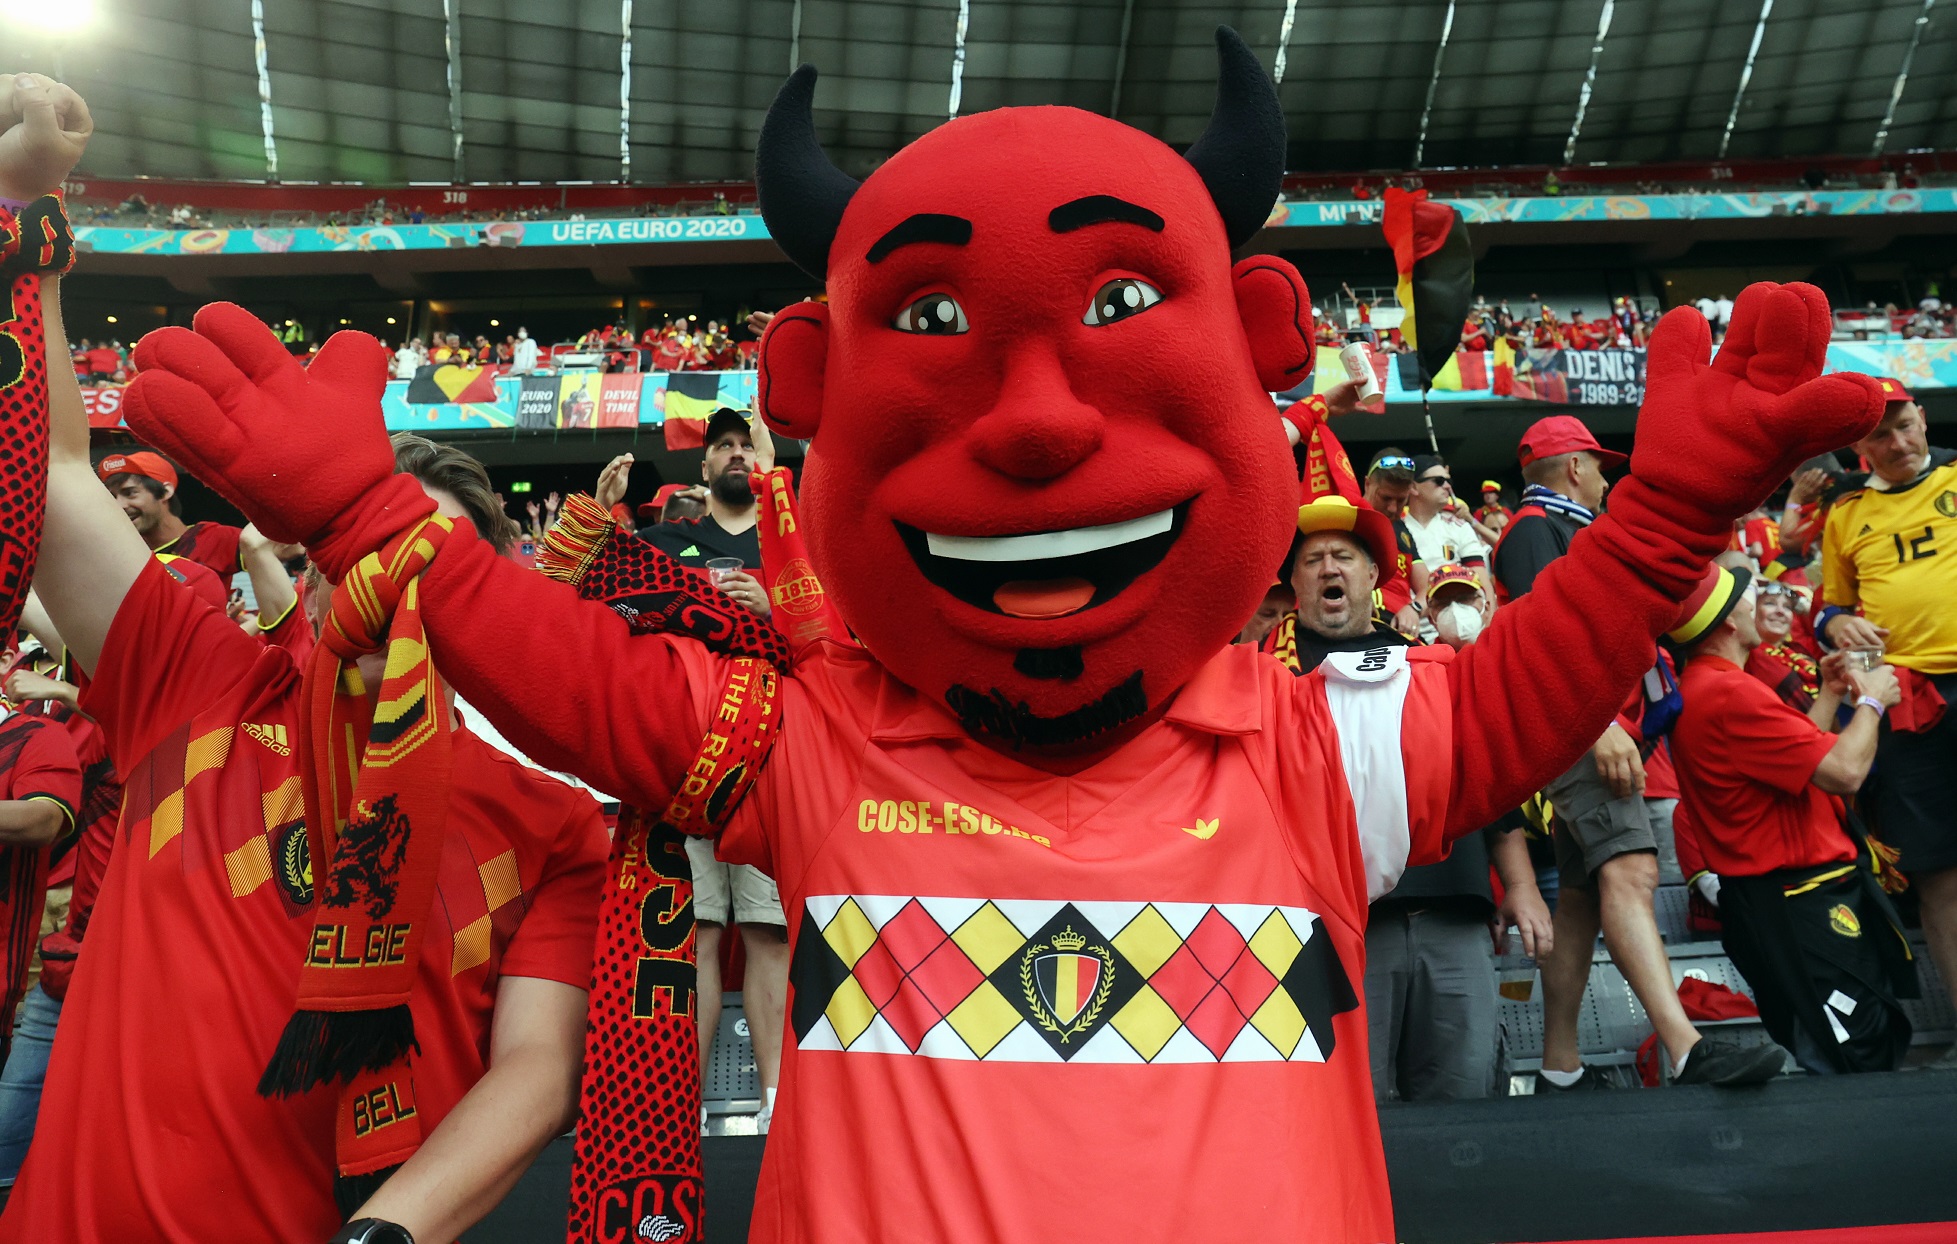 ‘Euro 2021’ tops list of Google searches in Belgium this year The